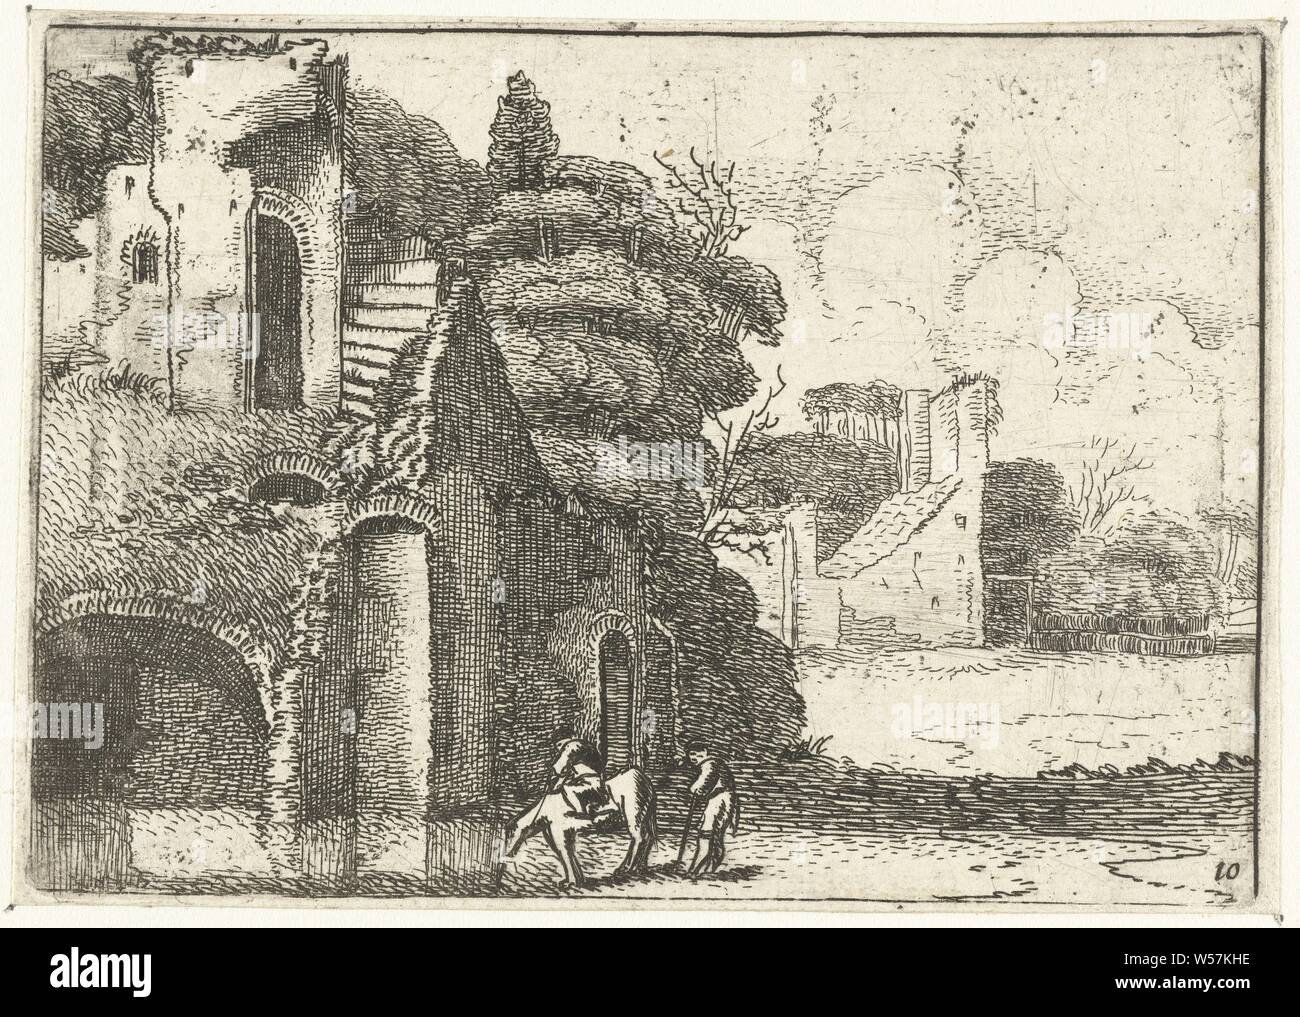 Drinking horse at ruins Small landscapes (series title), landscape with ruins, horse, Jan van de Velde (II), 1603 - 1641, paper, etching, h 71 mm × w 100 mm Stock Photo